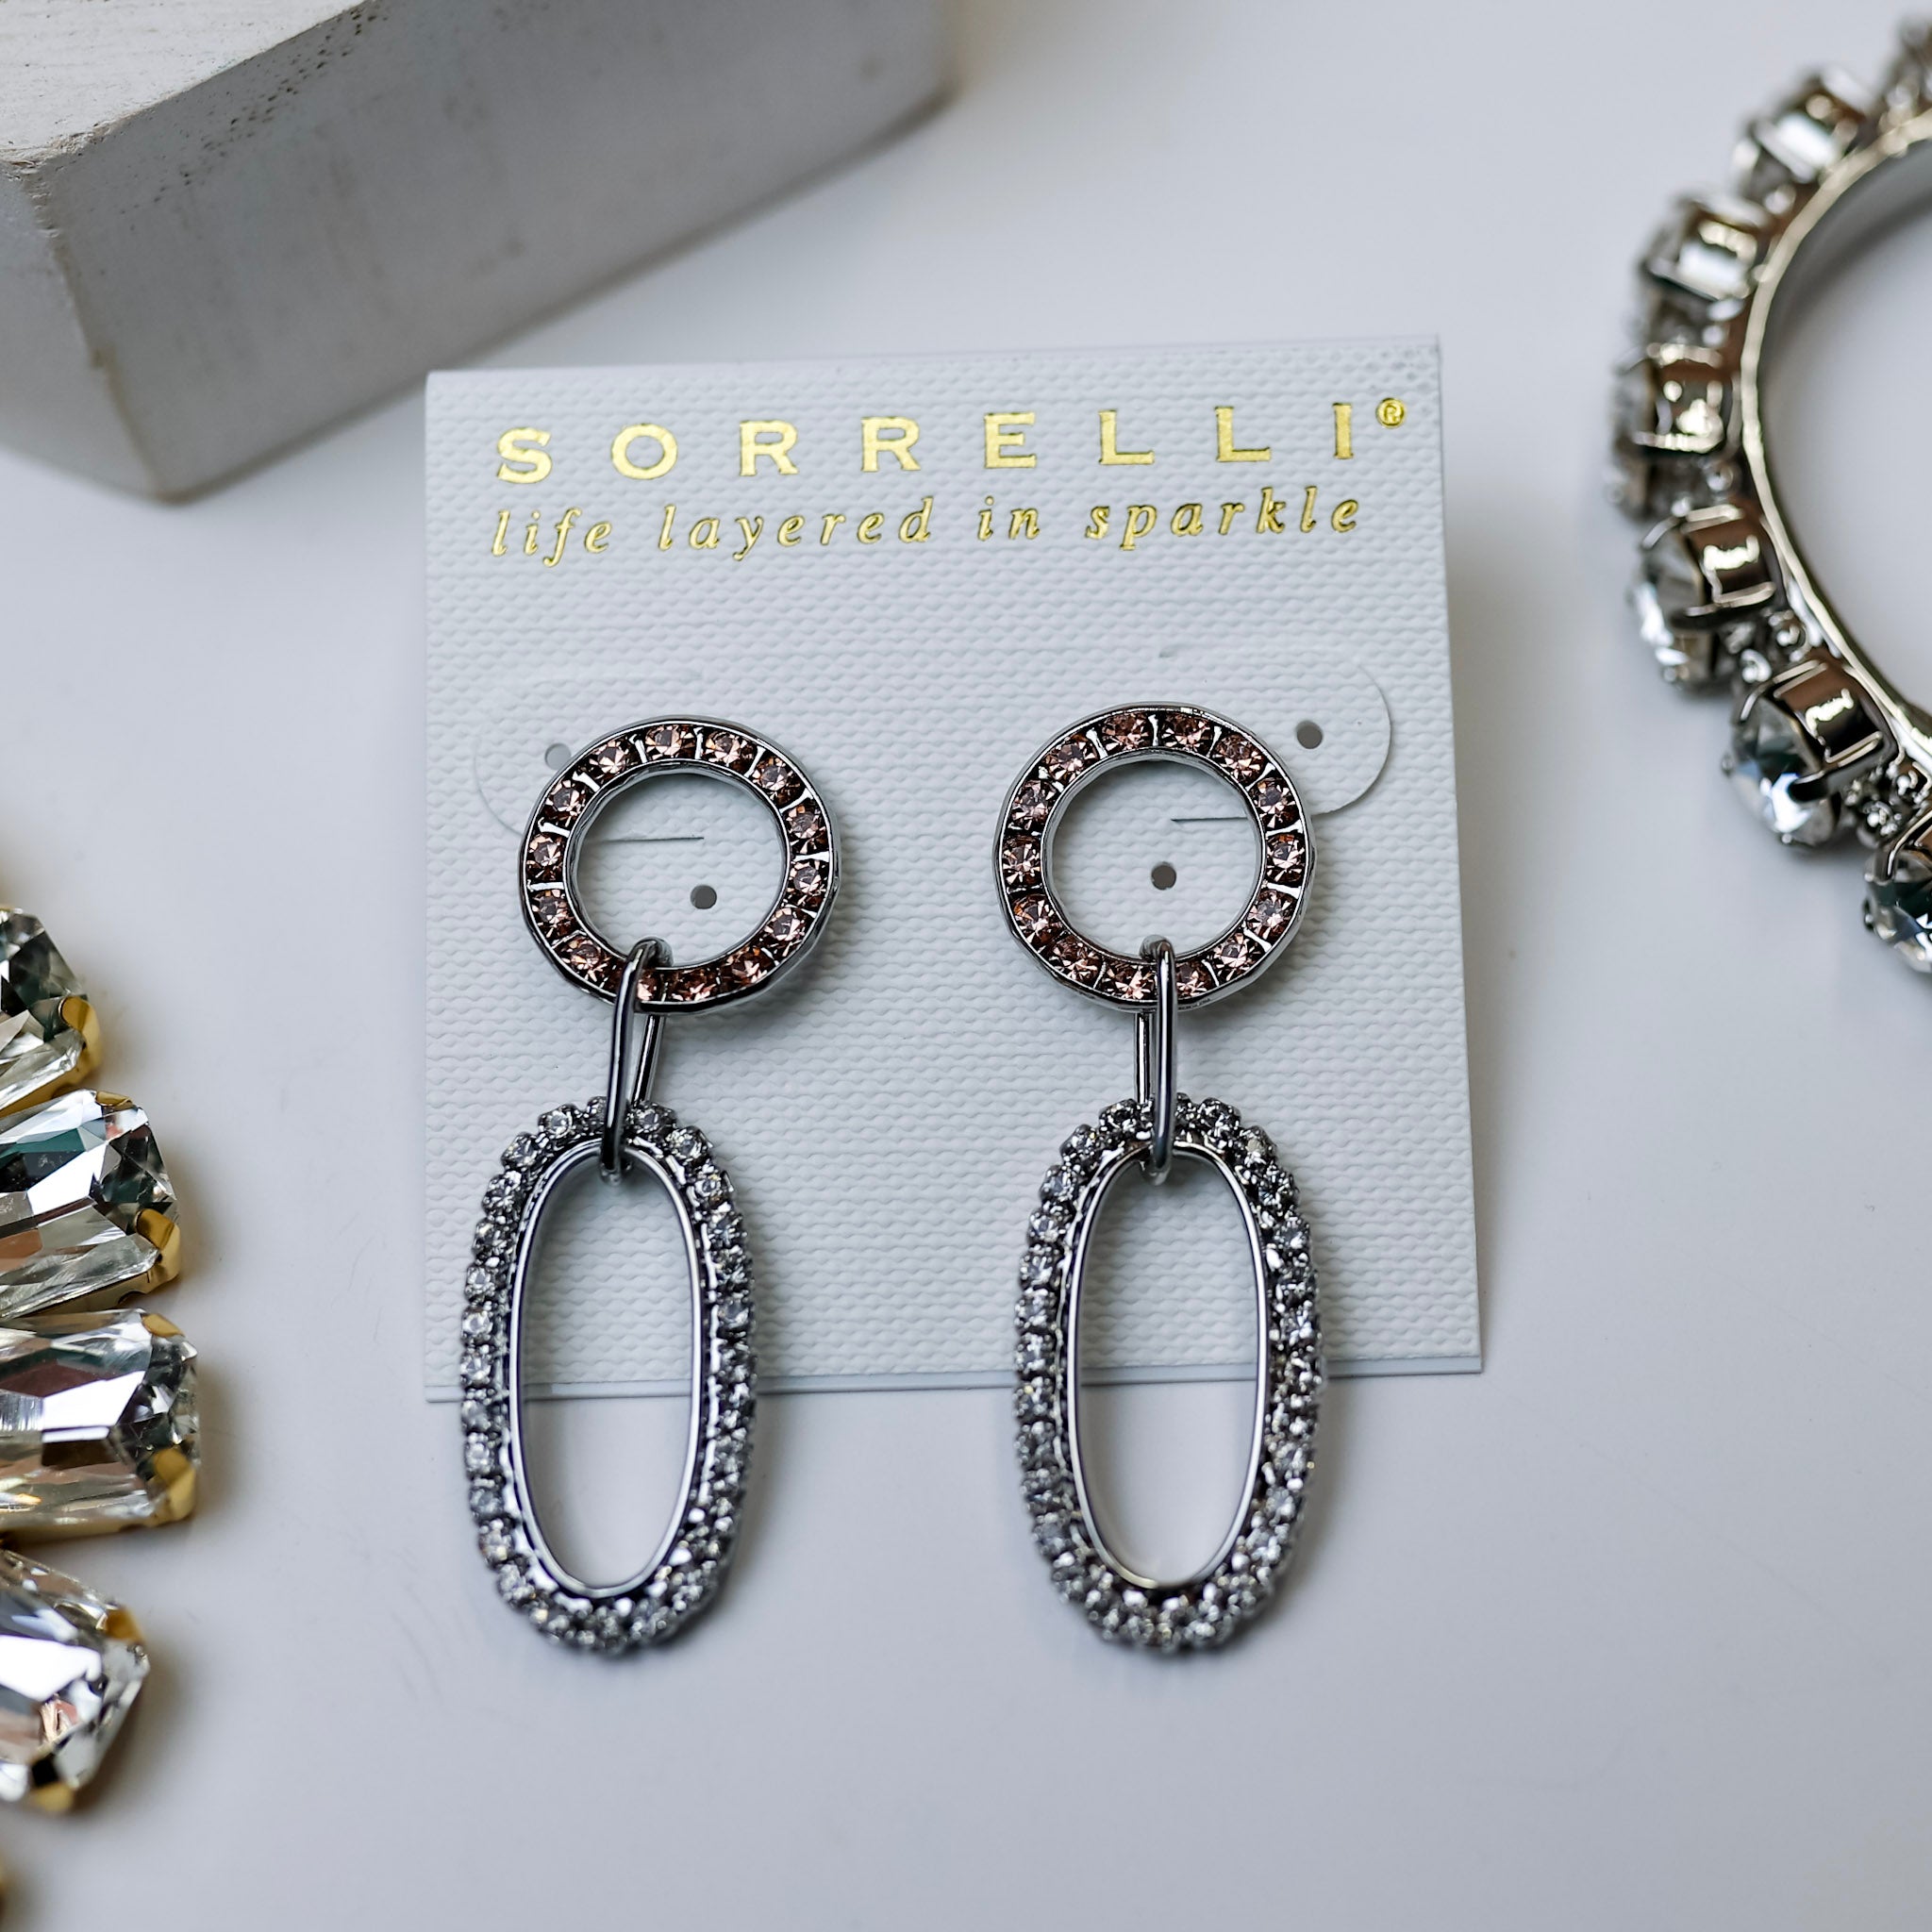 A pair of dangle earrings that consist of a circle outline with blush crystals and an oval outline with clear crystals. These earrings are pictured on a white background with crystal necklaces.